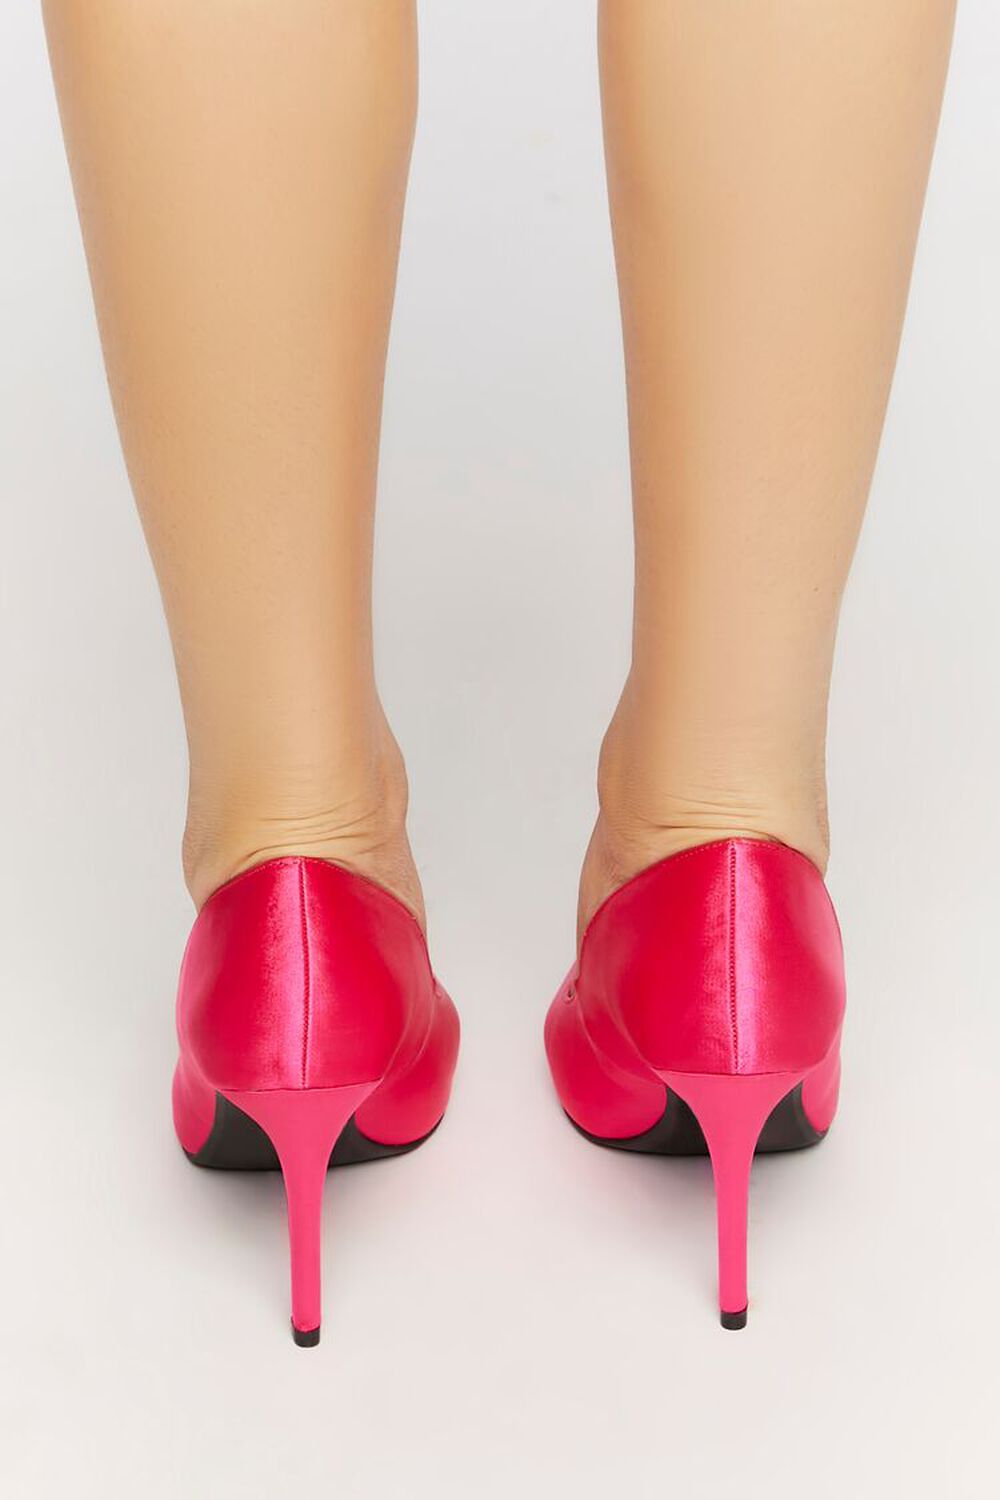 HOT PINK Satin Pointed Toe Pumps, image 3